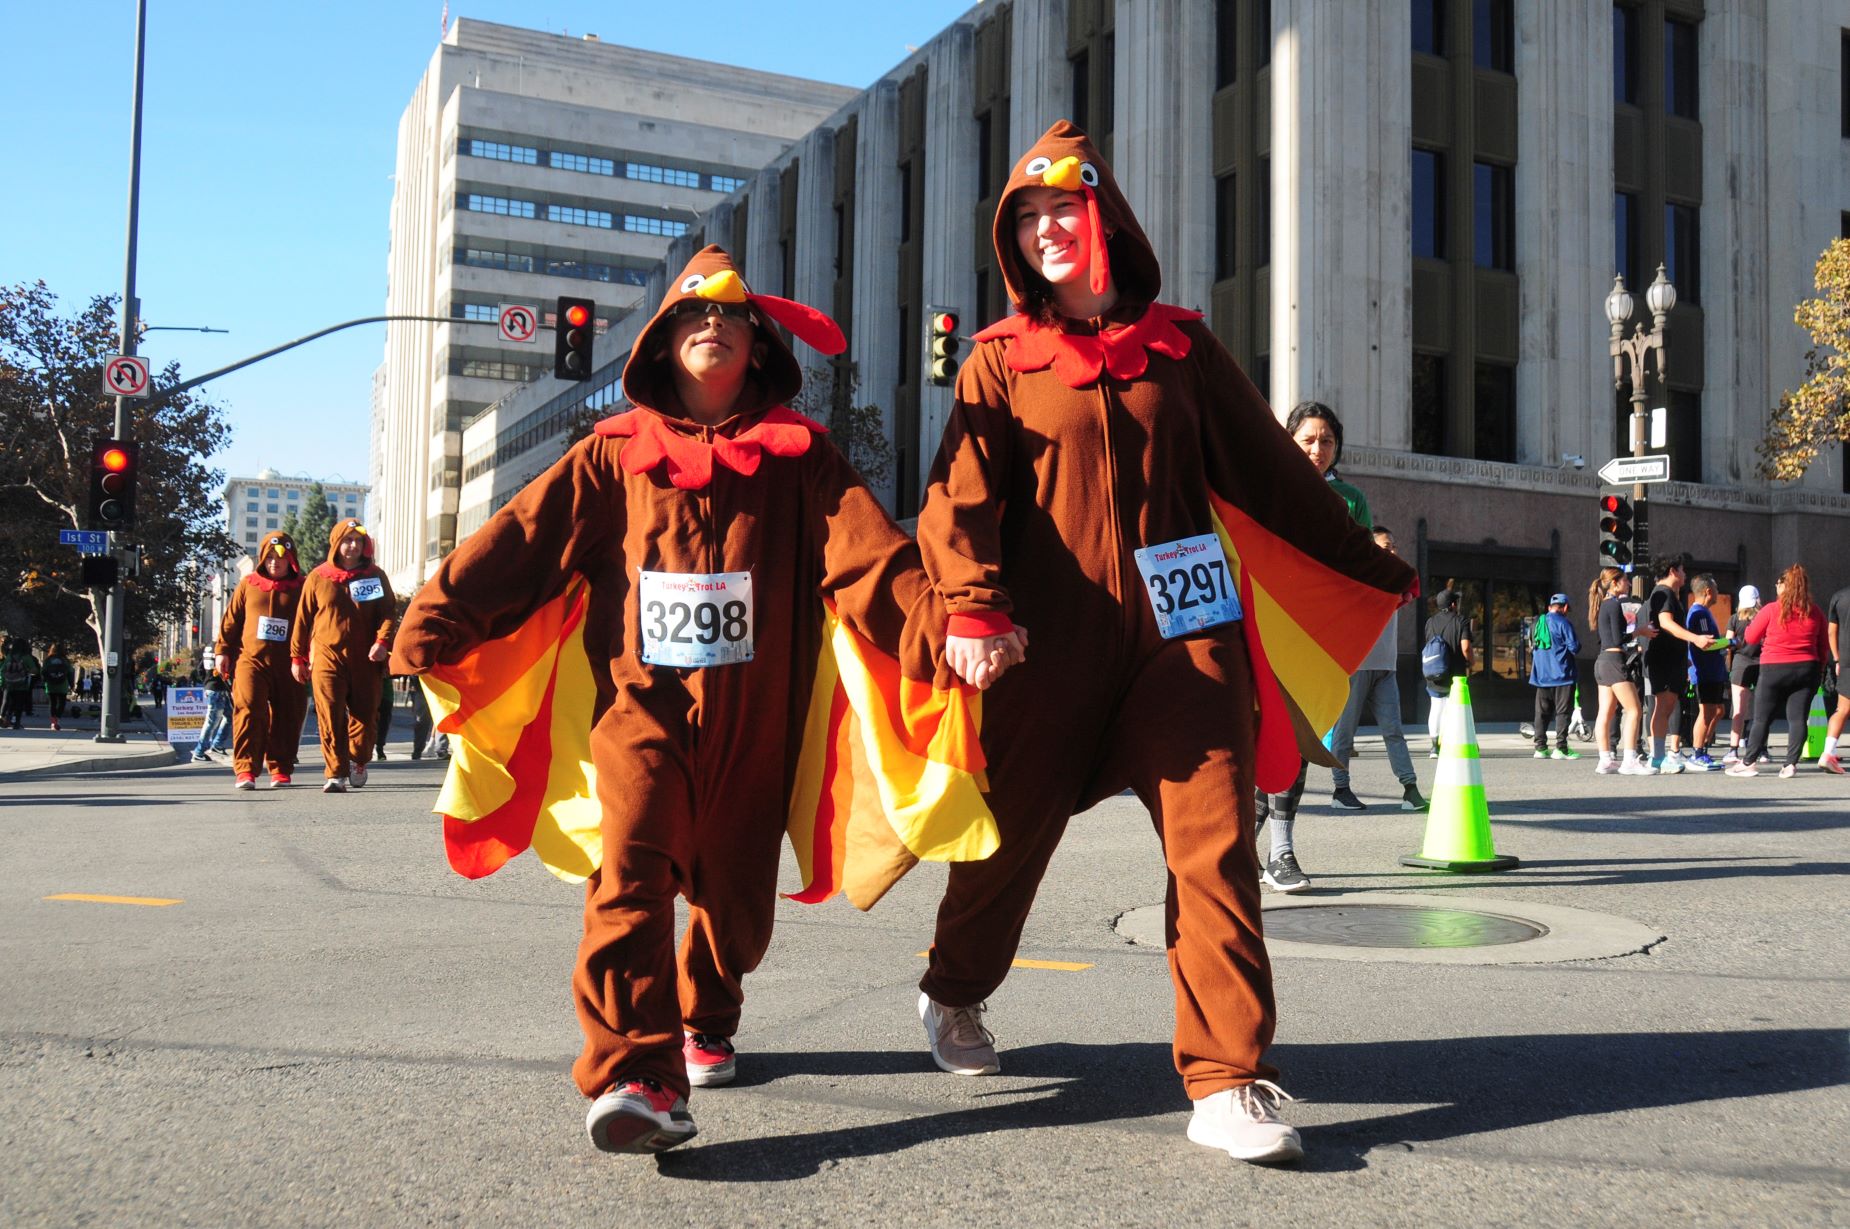 An image of two people dressed in costume at the turkey trot for a happy Turkey day.